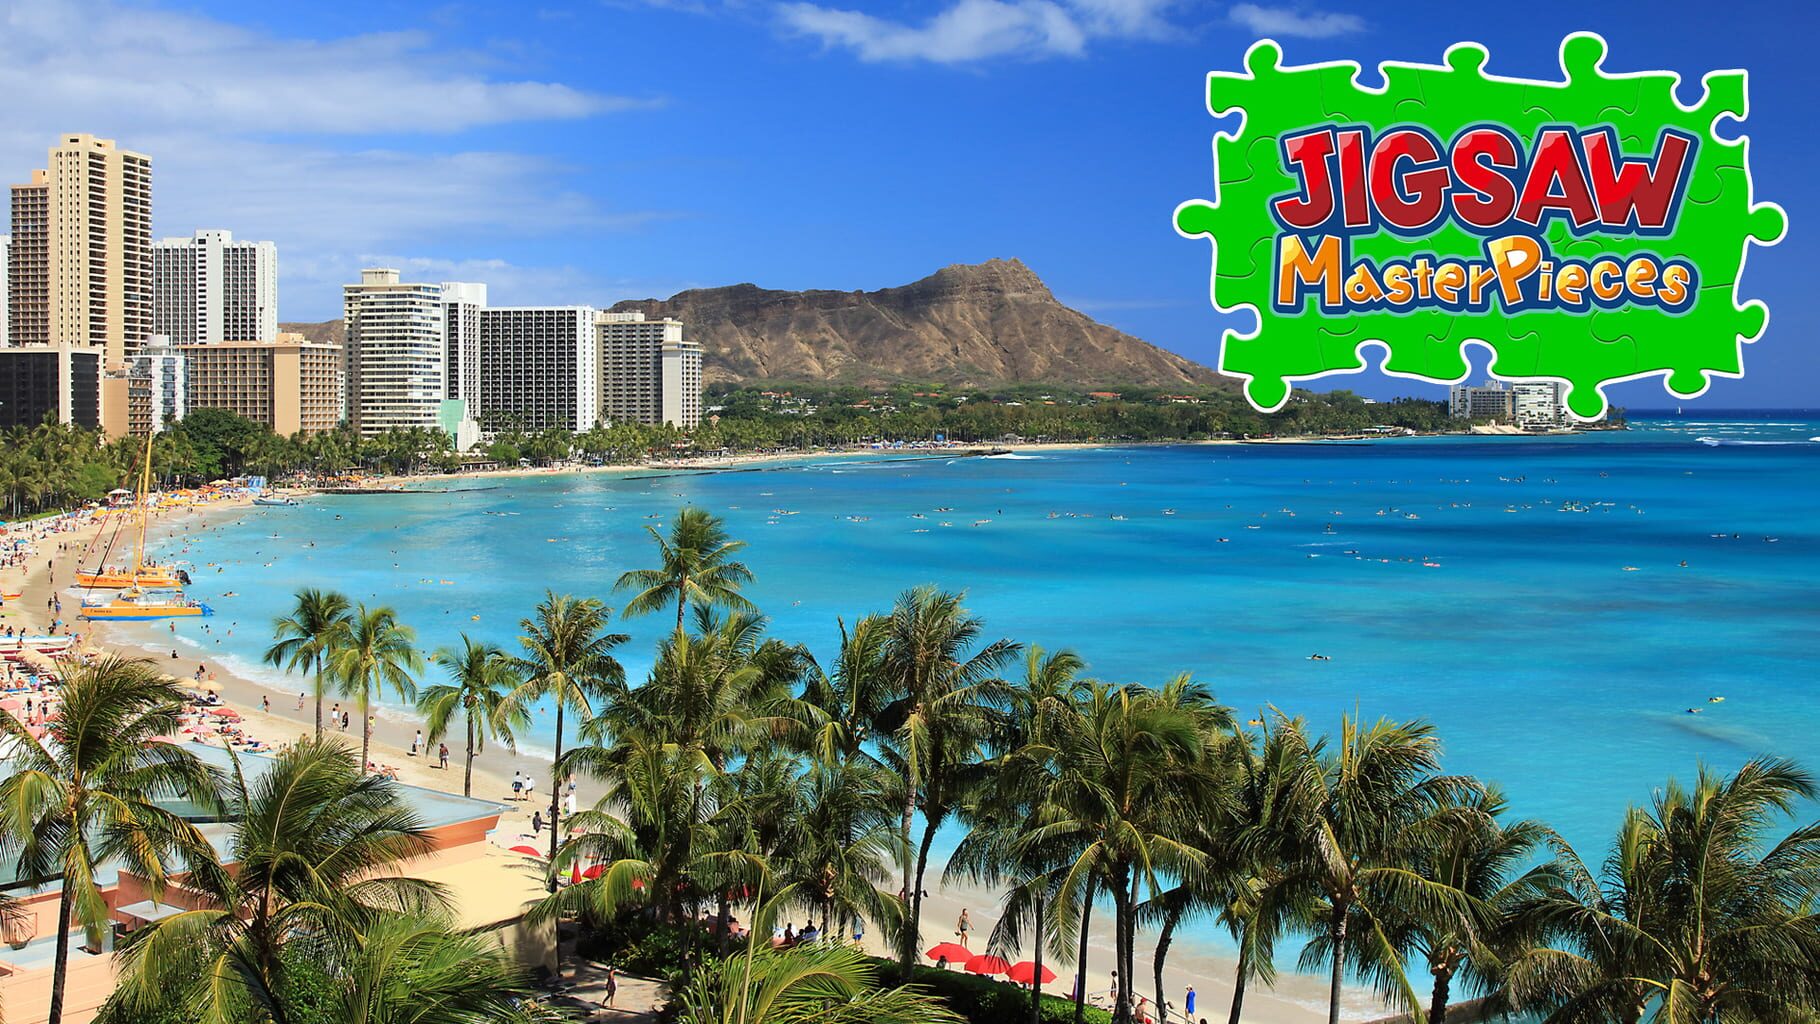 Jigsaw Masterpieces: Hawaii - Most Beautiful Places in the World artwork